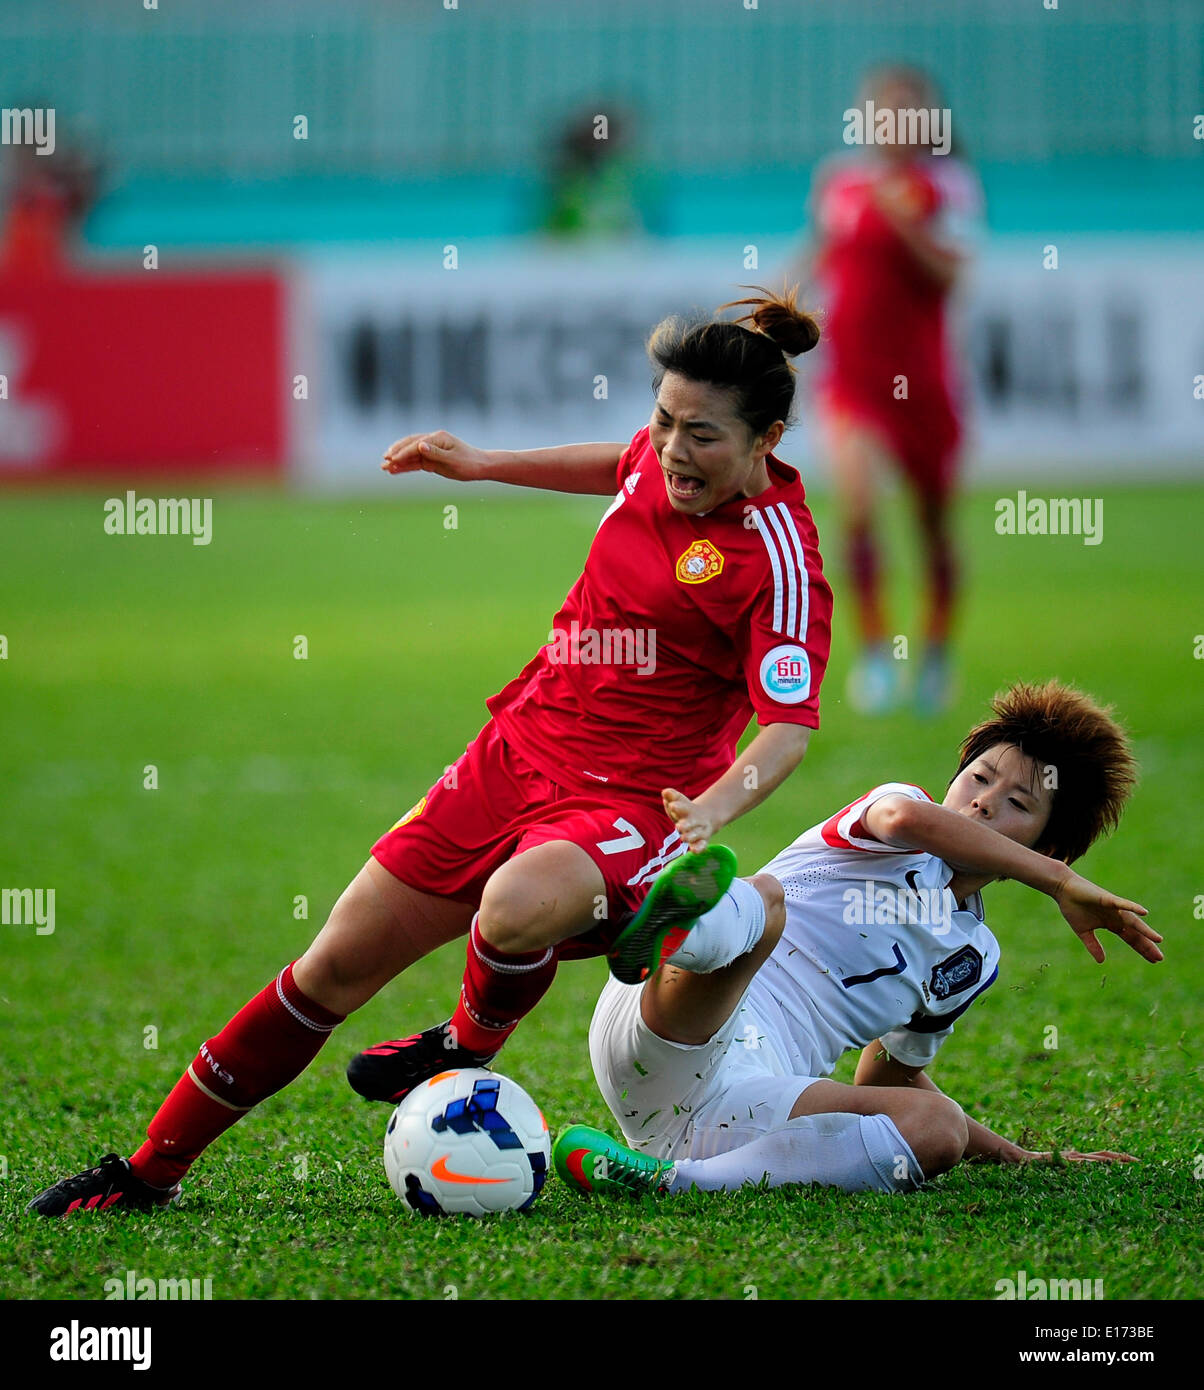 Ho Chi Minh City, Vietnam. 25th May, 2014. Xu Yanlu (L) of China vies for the ball during the third-place match of 2014 Asian Football Confederation (AFC) Women's Asian Cup at Thong Nhat Stadium in Ho Chi Minh City, Vietnam, May 25, 2014. China defeat South Korea 2-1 to win the third place of the event. © He Jingjia/Xinhua/Alamy Live News Stock Photo